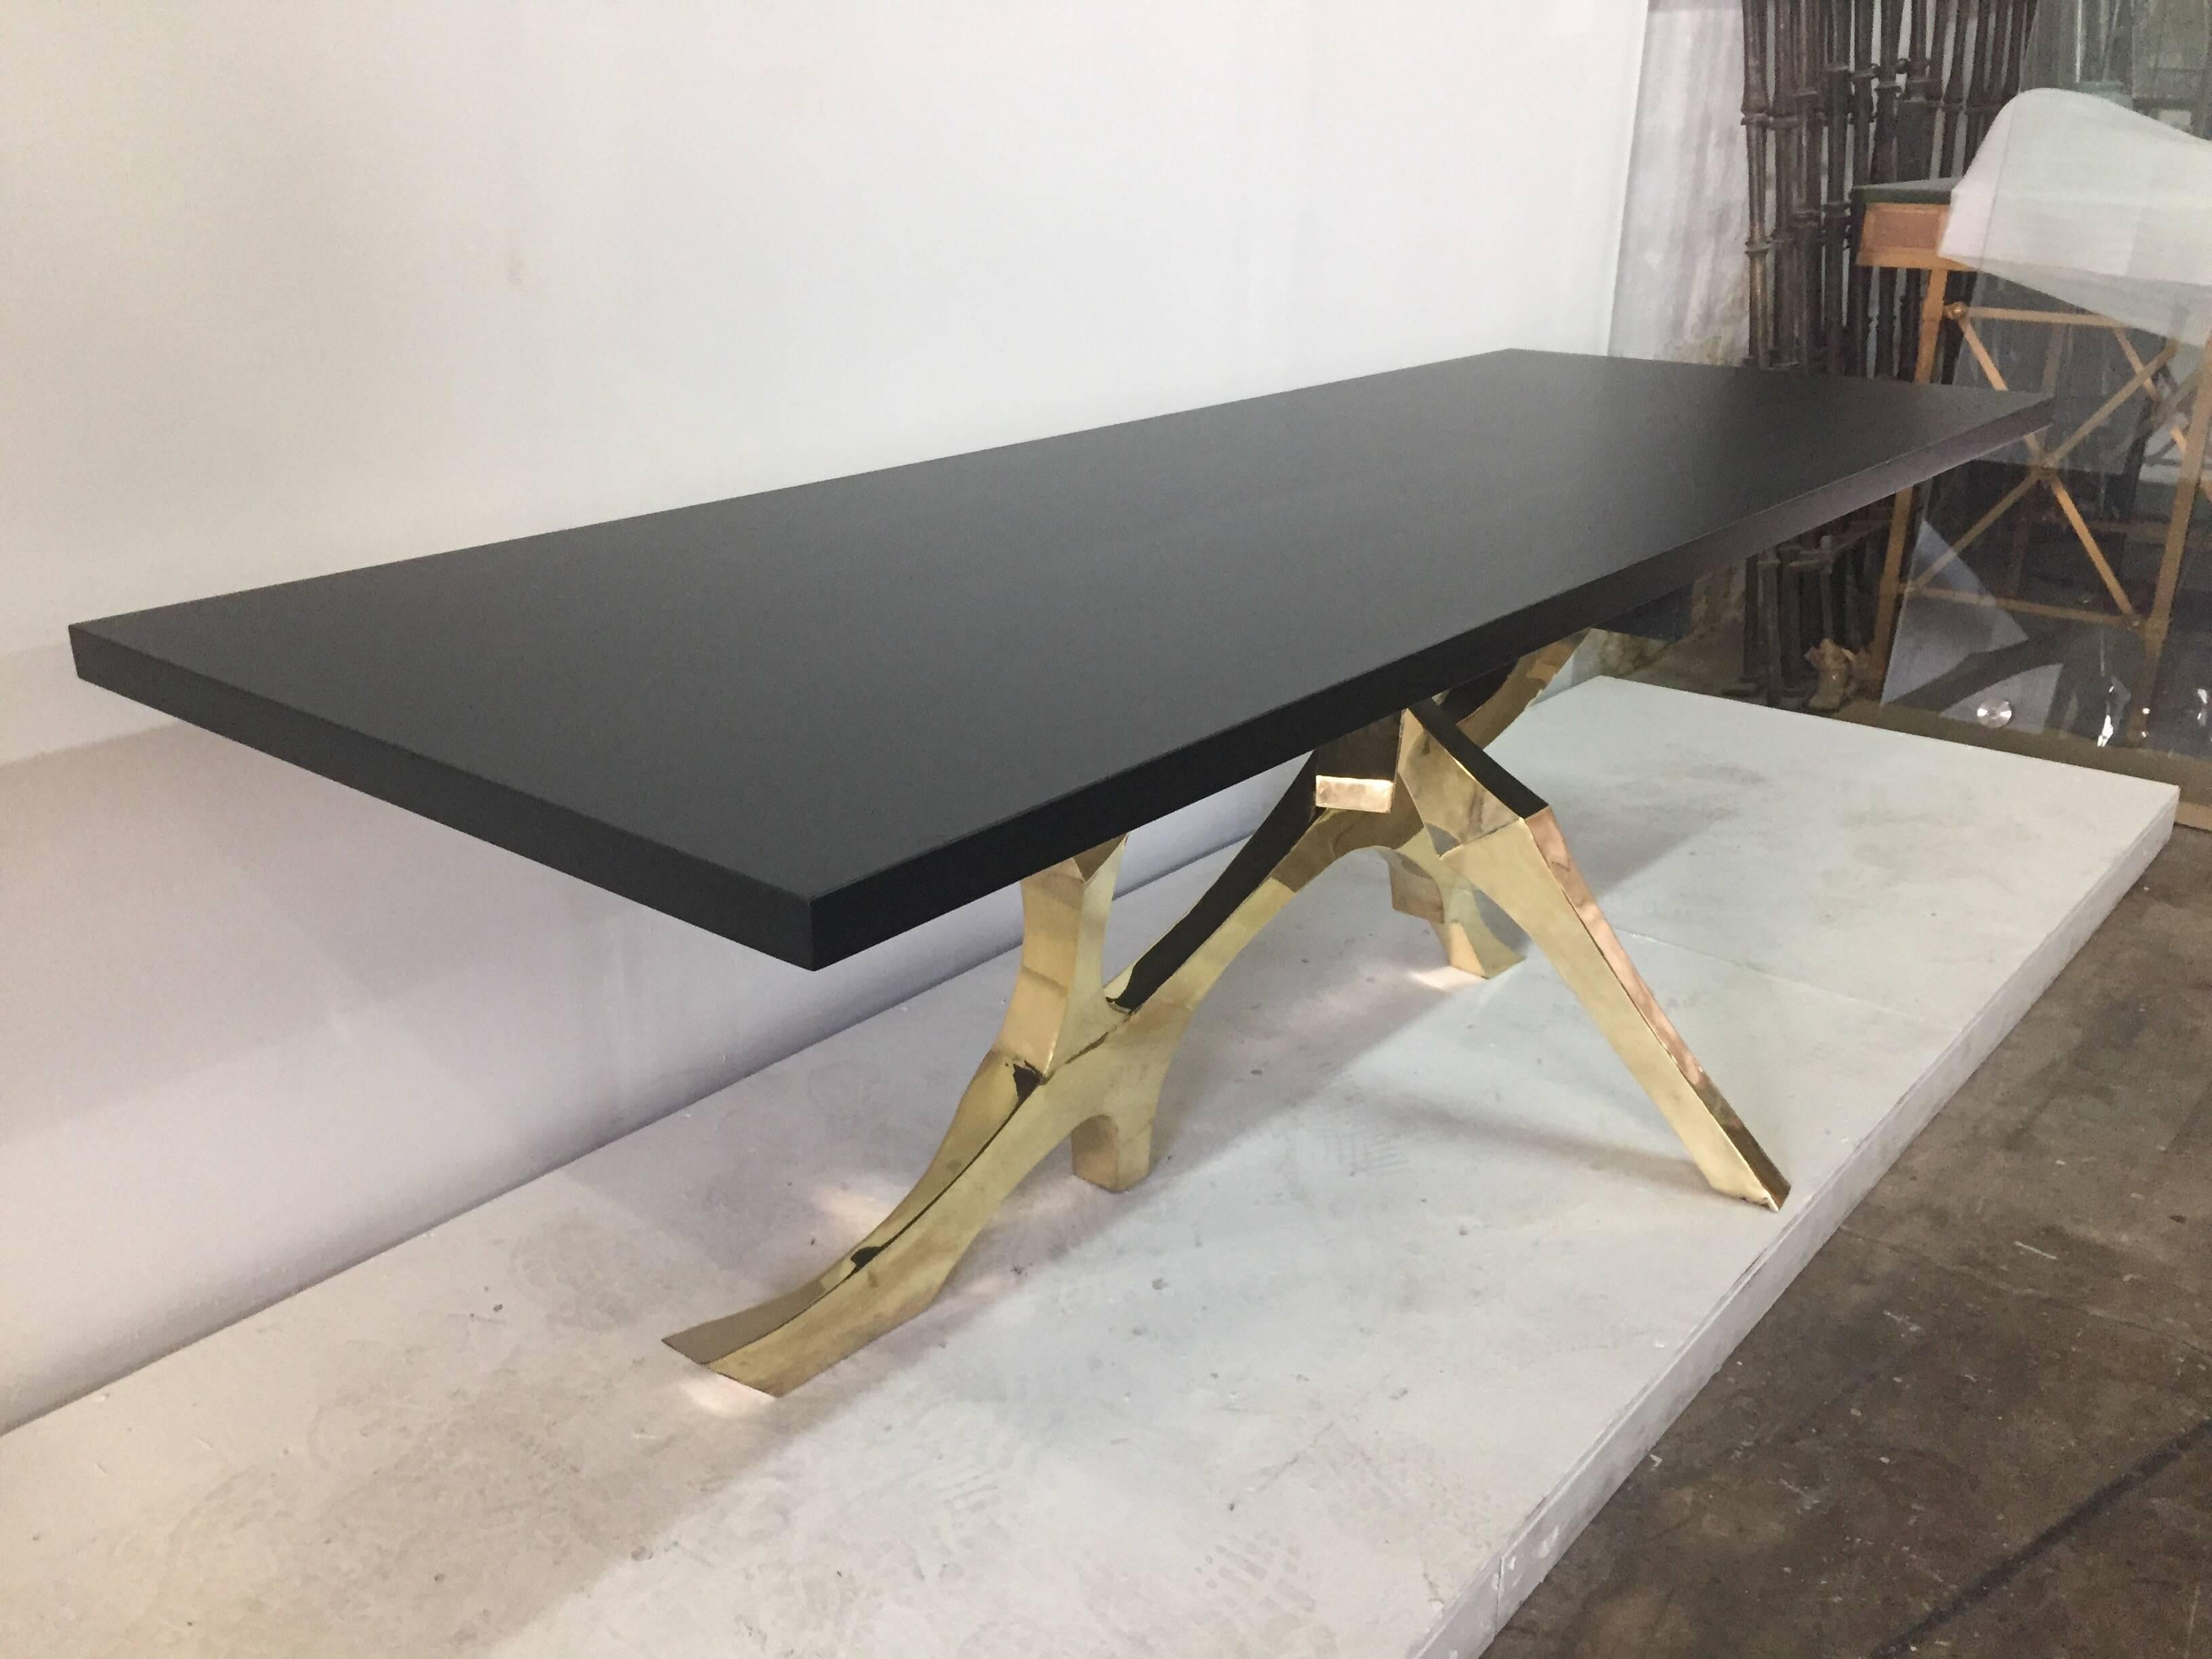 This whimsical and important organic designed table base in brass is topped by a black matte finish wood top. Has been polished but not lacquered so it will take on a patina over time.

Note: the base legs are wide in one area that kicks out